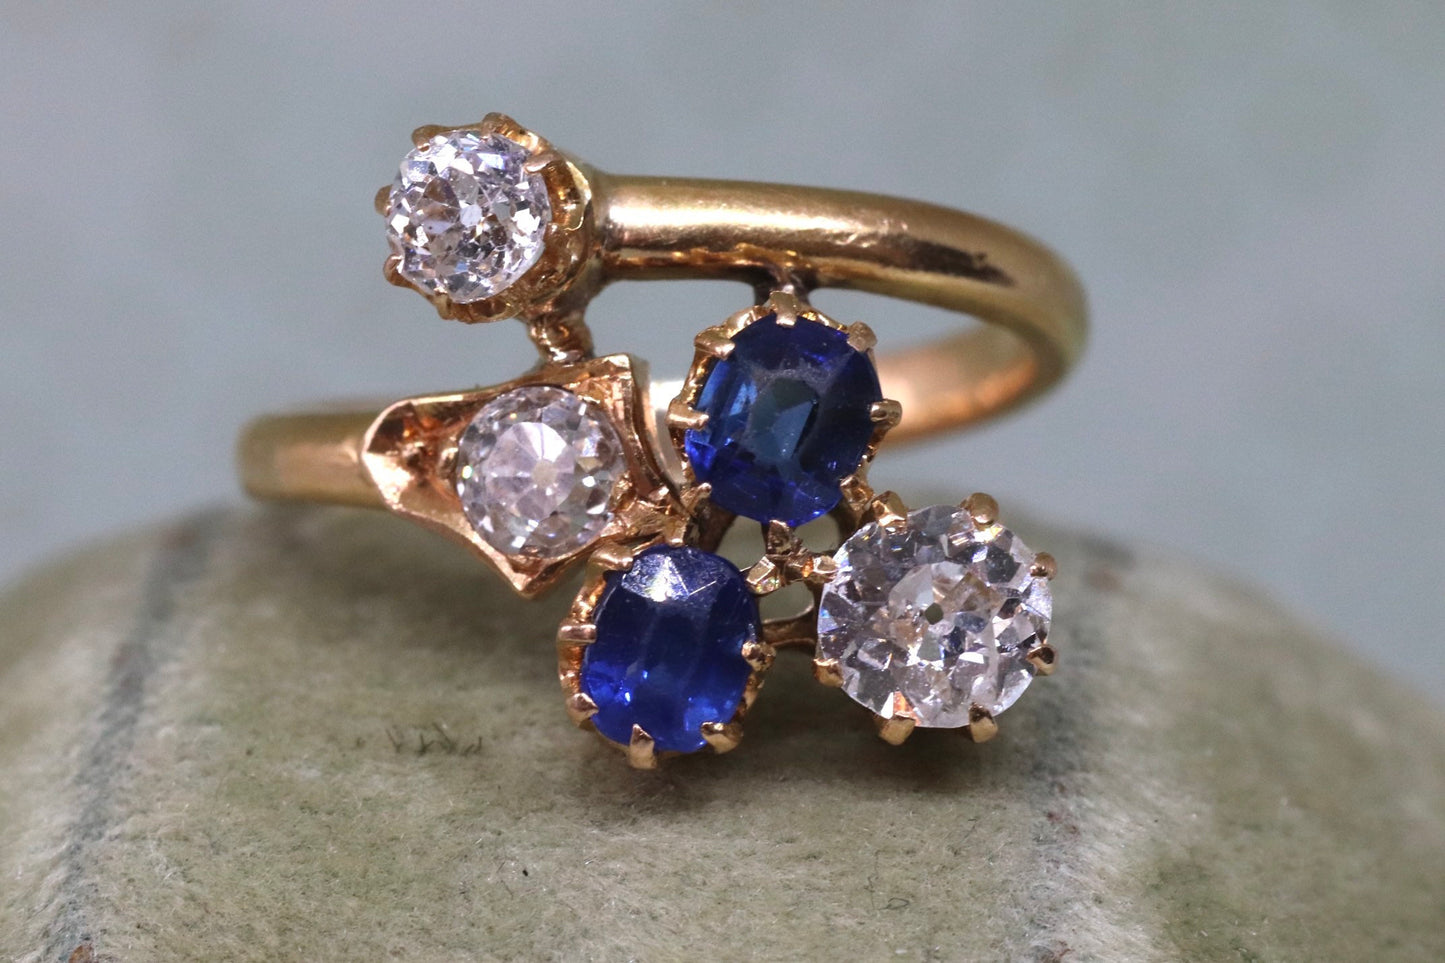 Authentic art nouveau 18k yellow gold old mine cut diamond and natural sapphire ring size 5.5 (sizable)